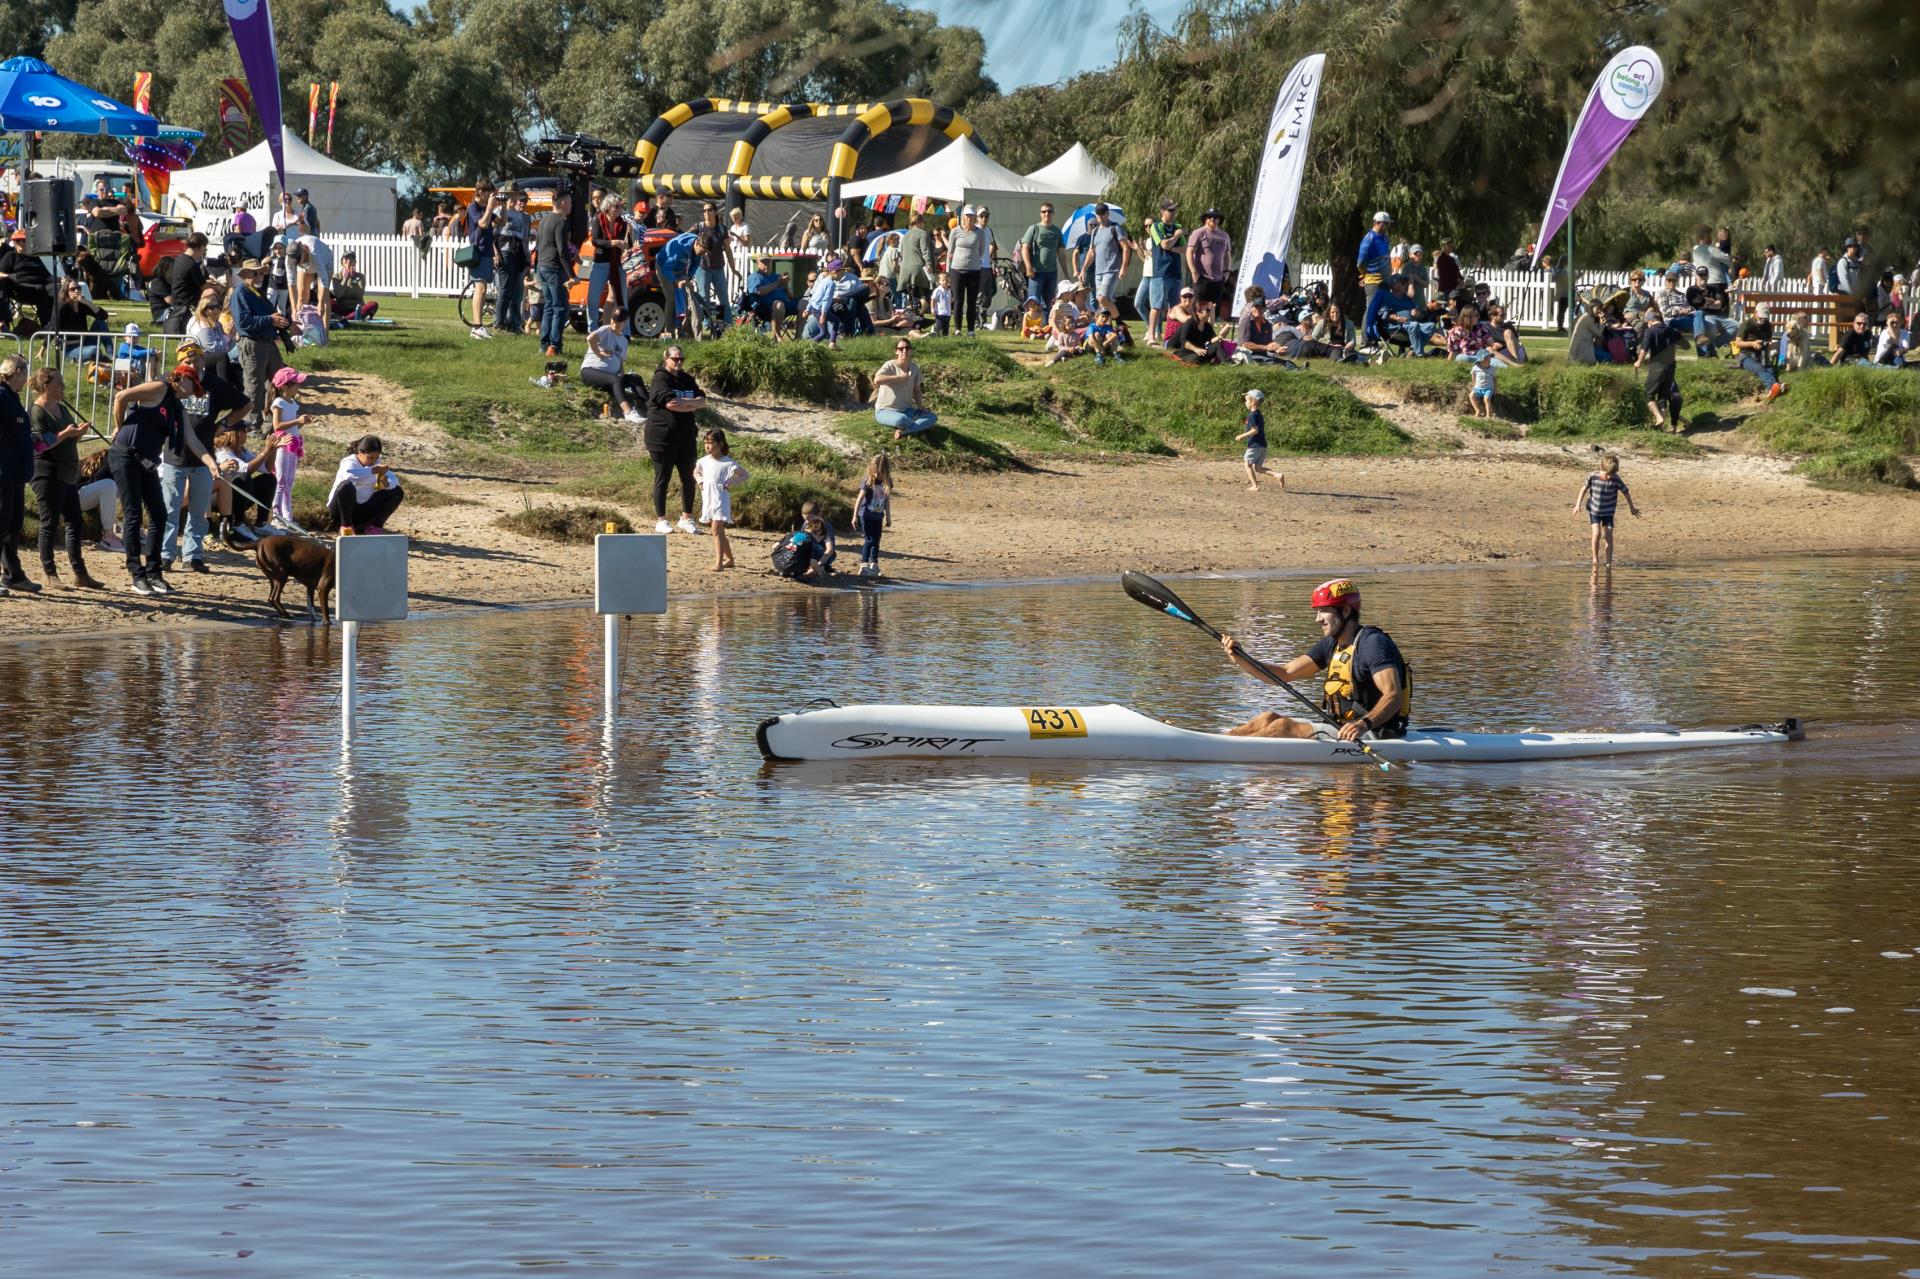 The Challenge is set for the Avon Descent